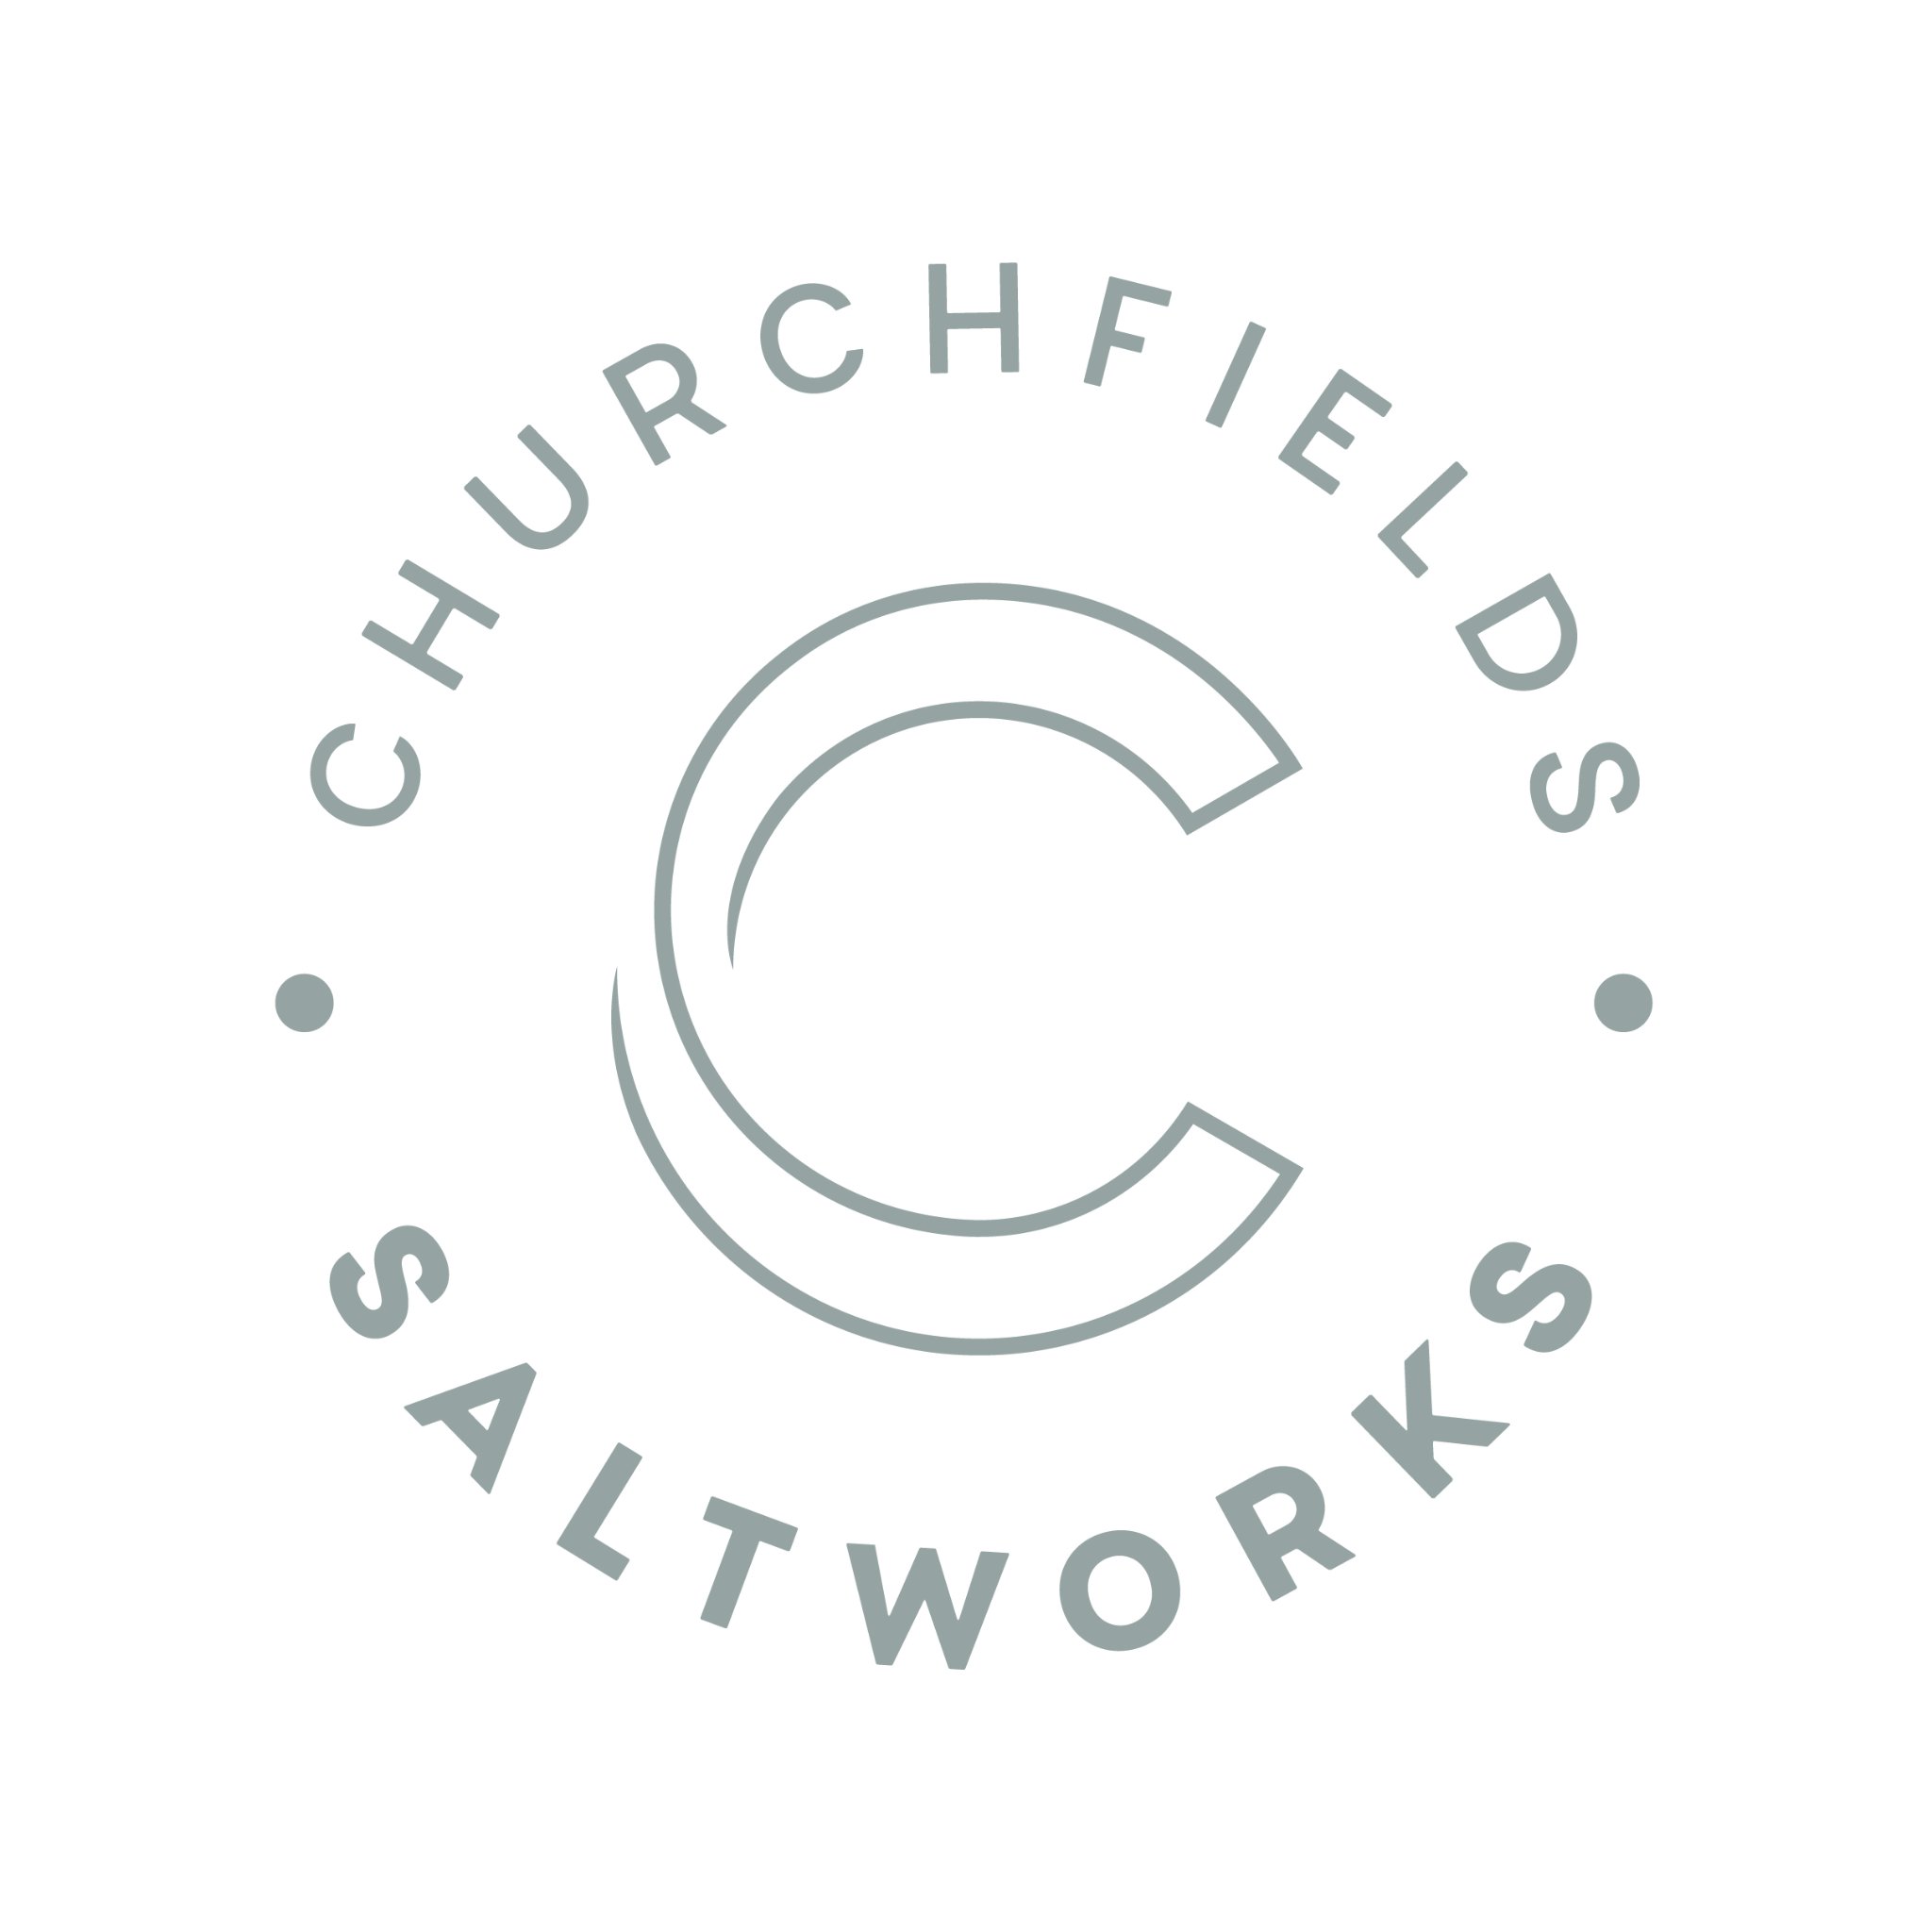 Churchfields Saltworks are proud to be producing Droitwich Salt again after nearly 100 years.